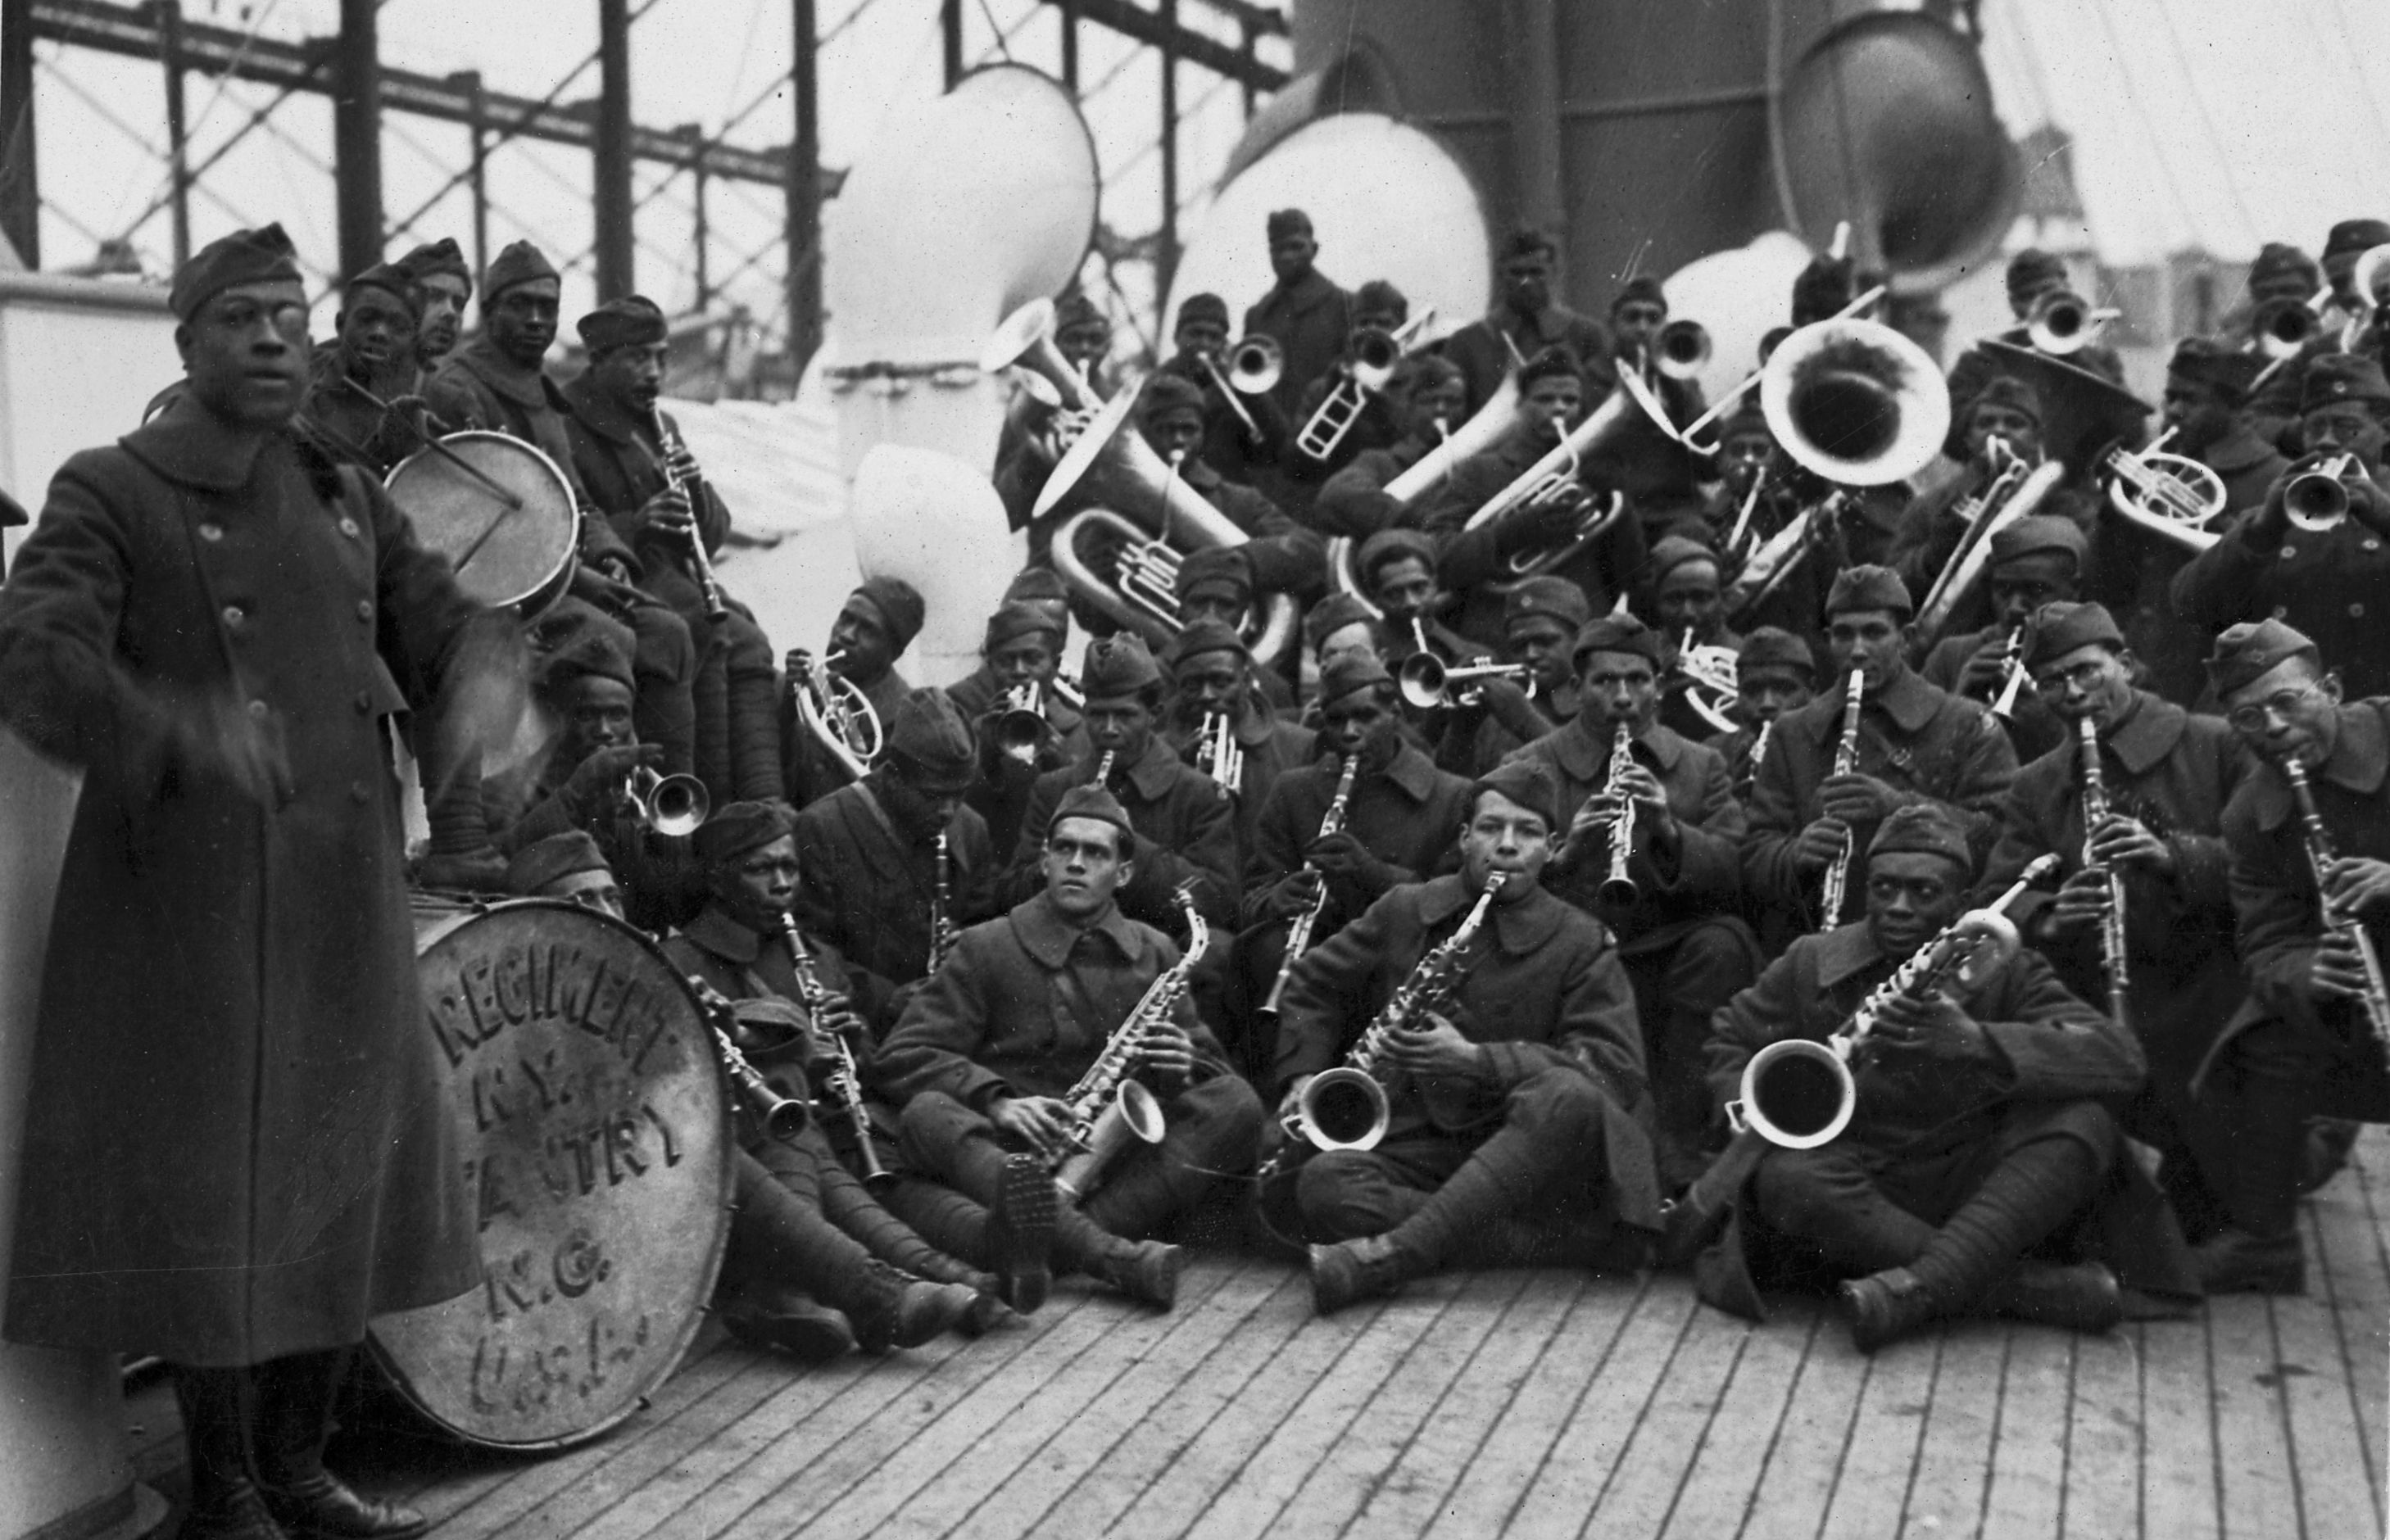 James Europe's jazz band with the 369th Infantry Regiment (the "Black Rattlers") returns from Europe on the SS Stockholm. The New York regiment, composed mostly of black and Puerto Rican soldiers, was the first African-American regiment to serve in World War I. National Archives.